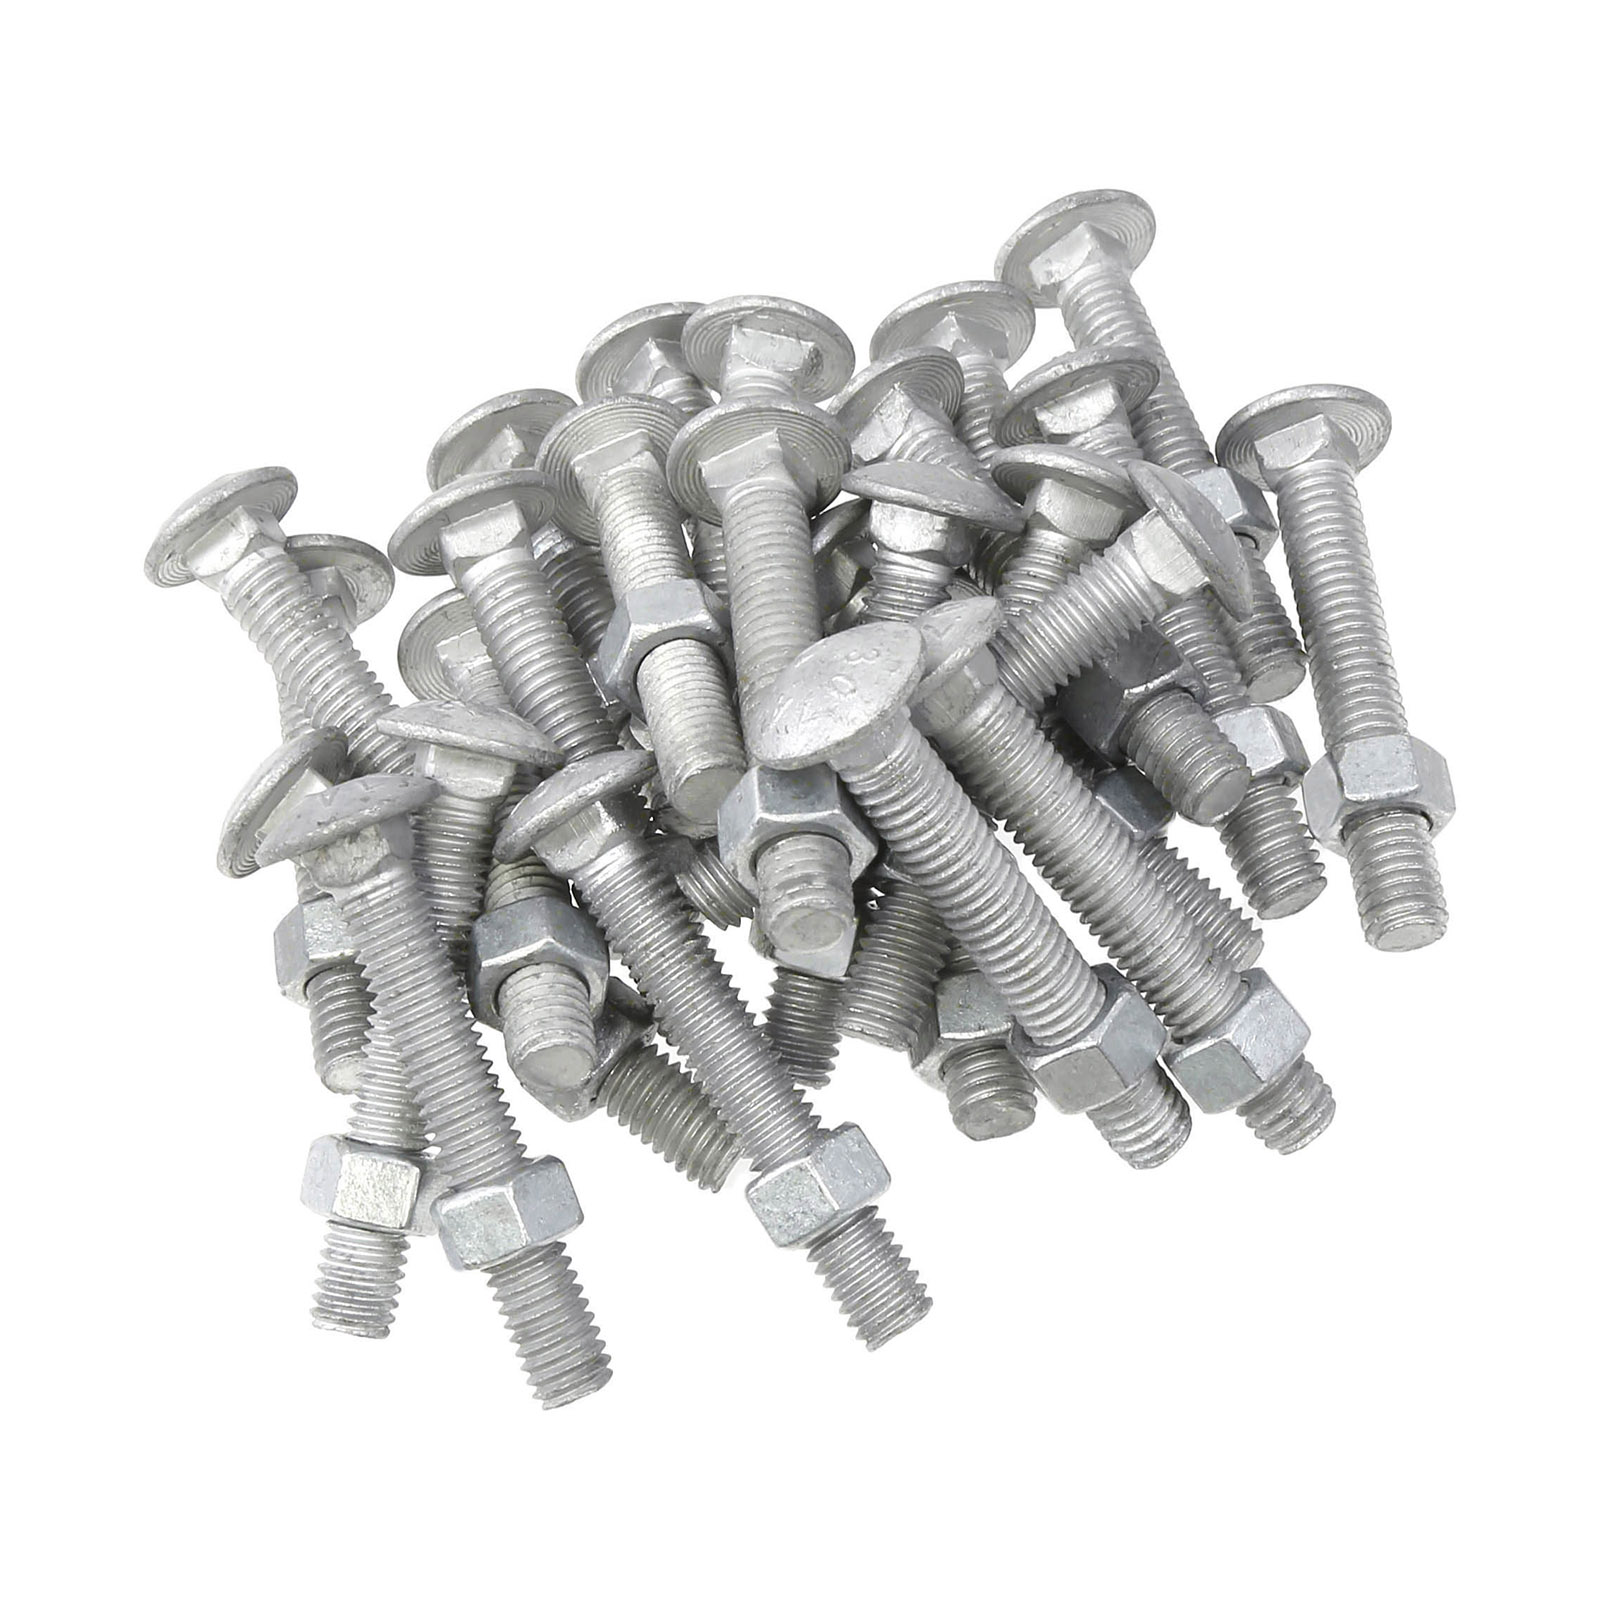 Pile Of Carriage Bolts